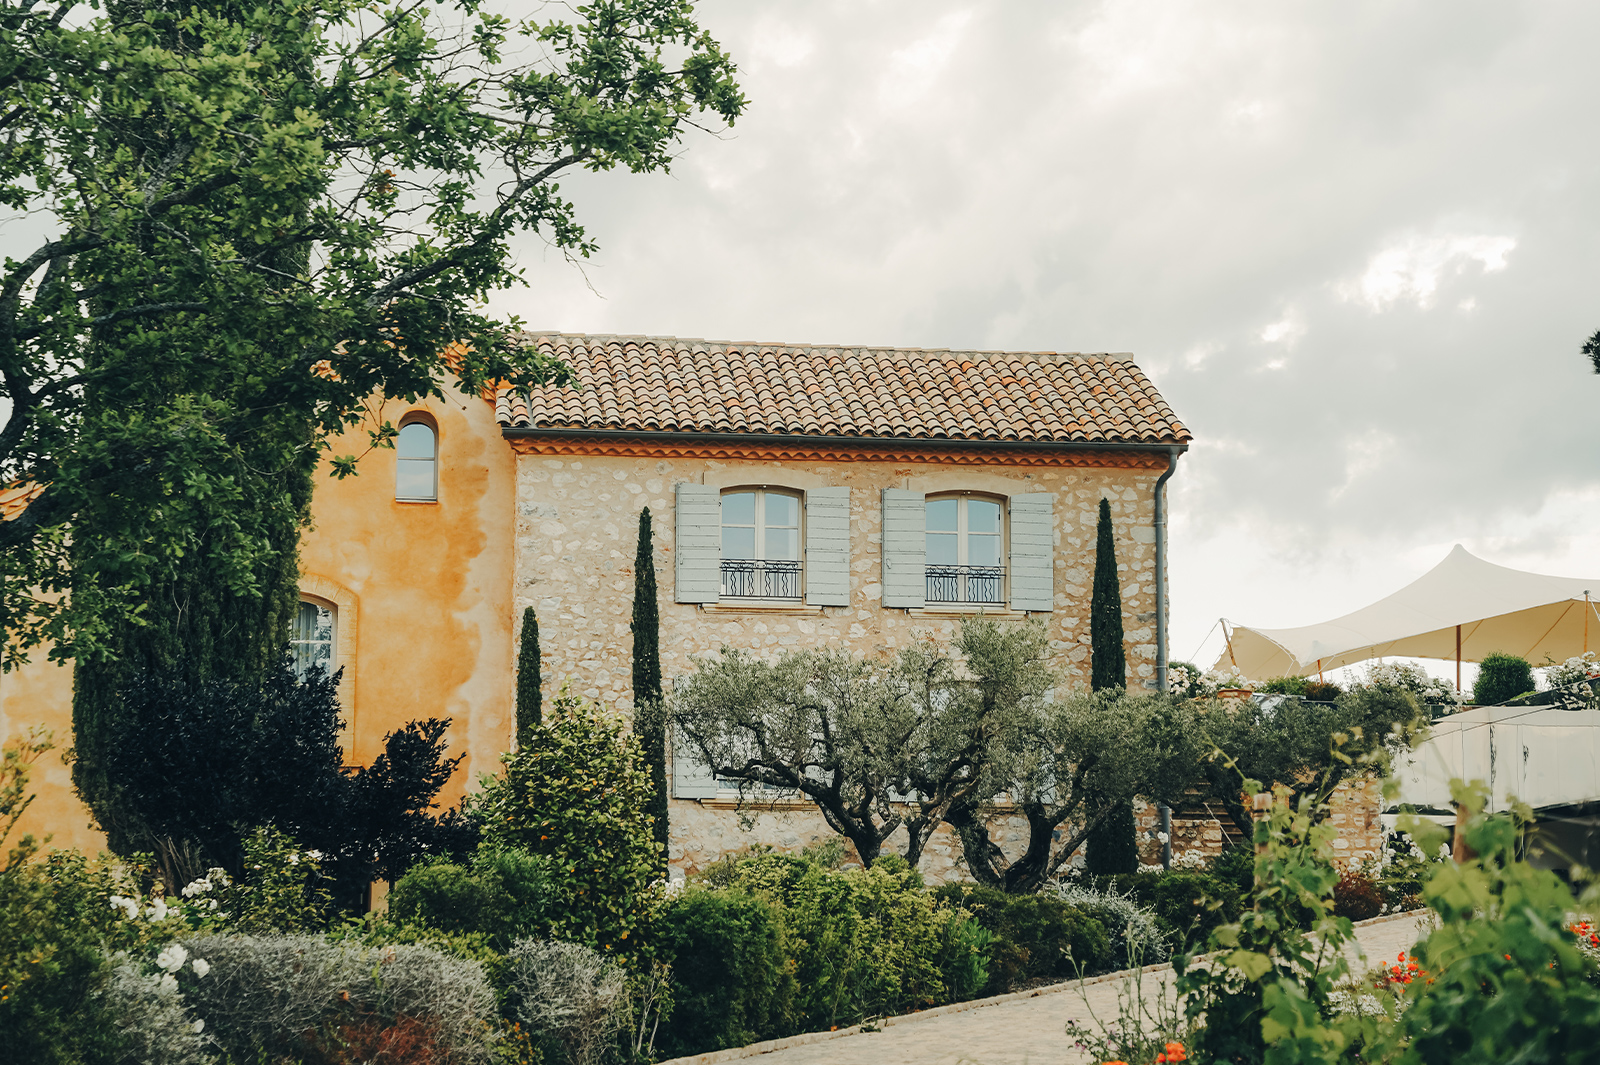 A yellow stone European villa with clay roof tiles and timber window shutters seen on a cloudy day